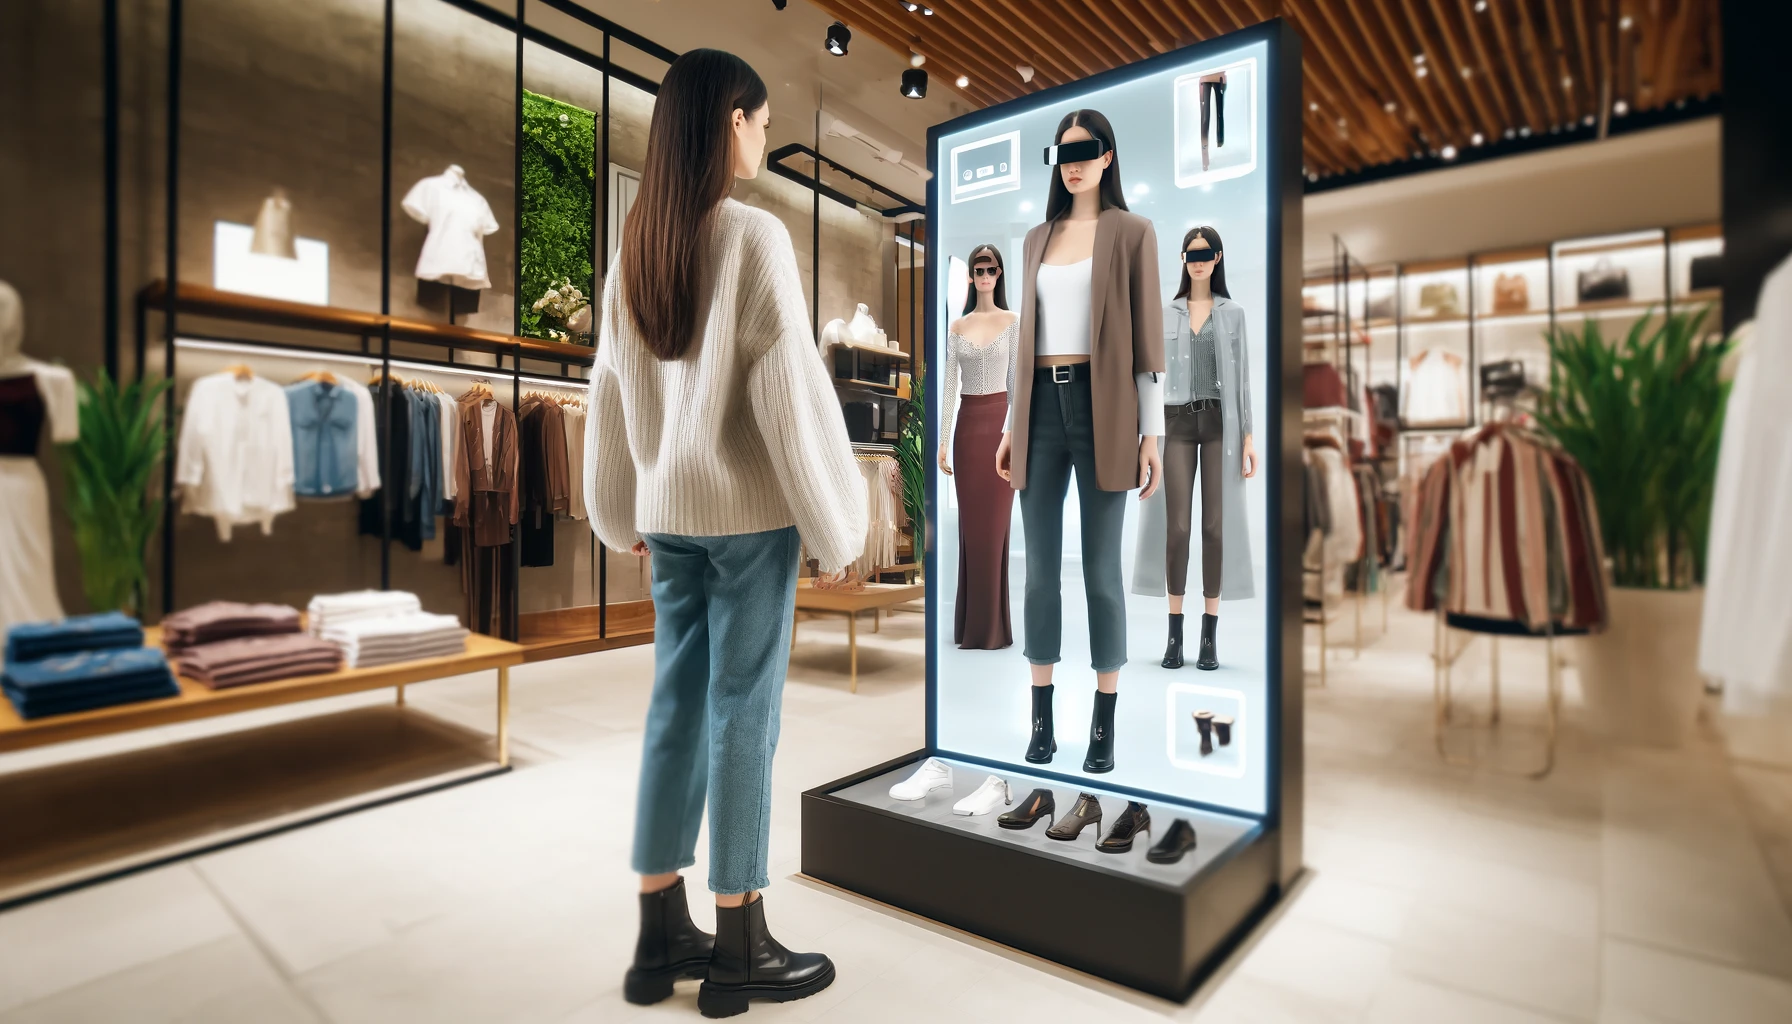 A customer using augmented reality in a clothing store to try on different outfits virtually. The image shows a young woman in front of a large digital mirror, looking at herself in various augmented reality outfits.